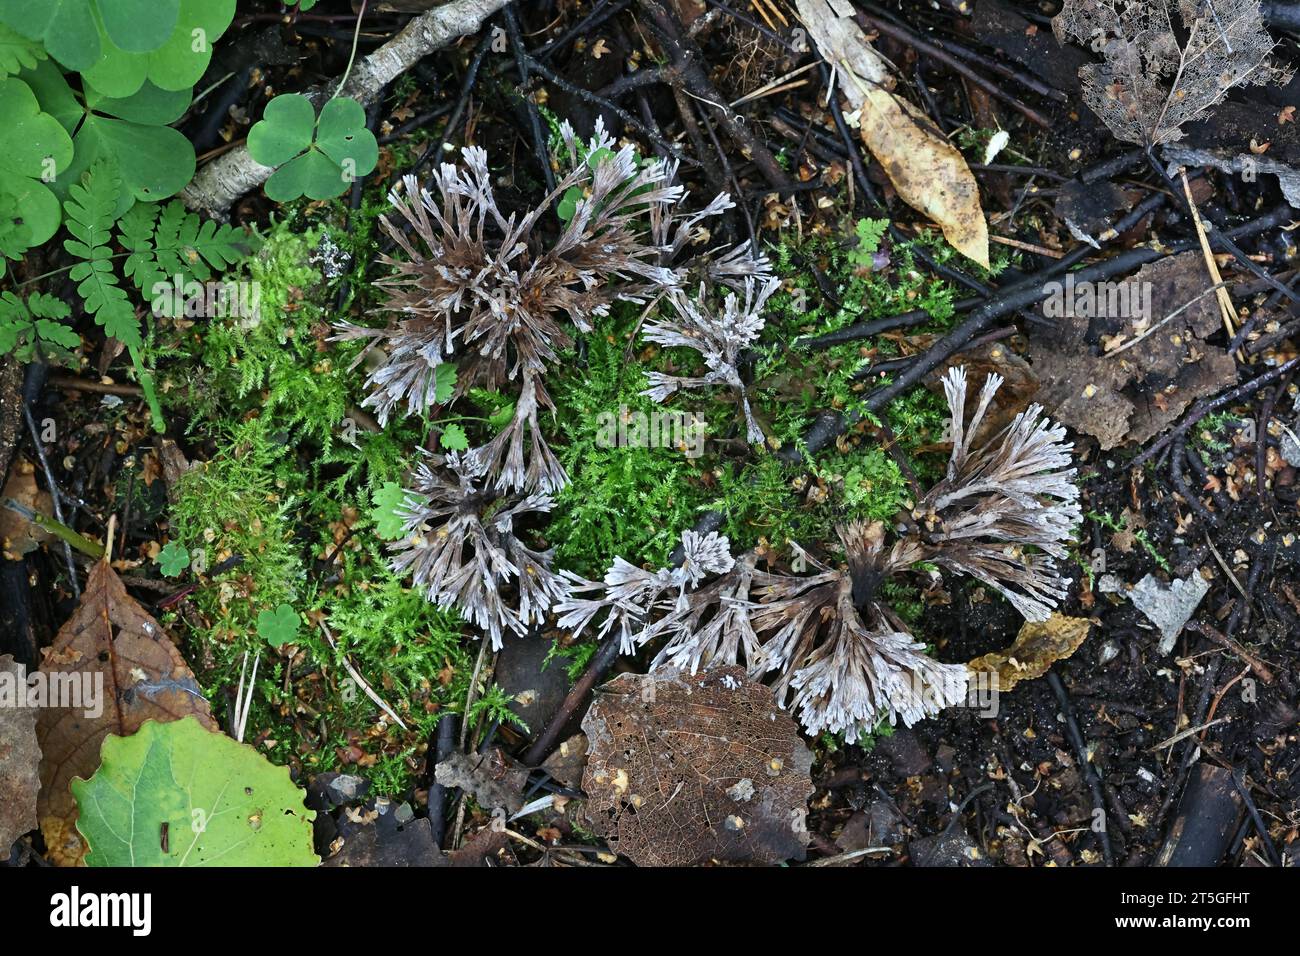 Thelephora penicillata, also called Phylacteria mollissima, commonly known as Urchin earthfan, wild fungus from Finland Stock Photo